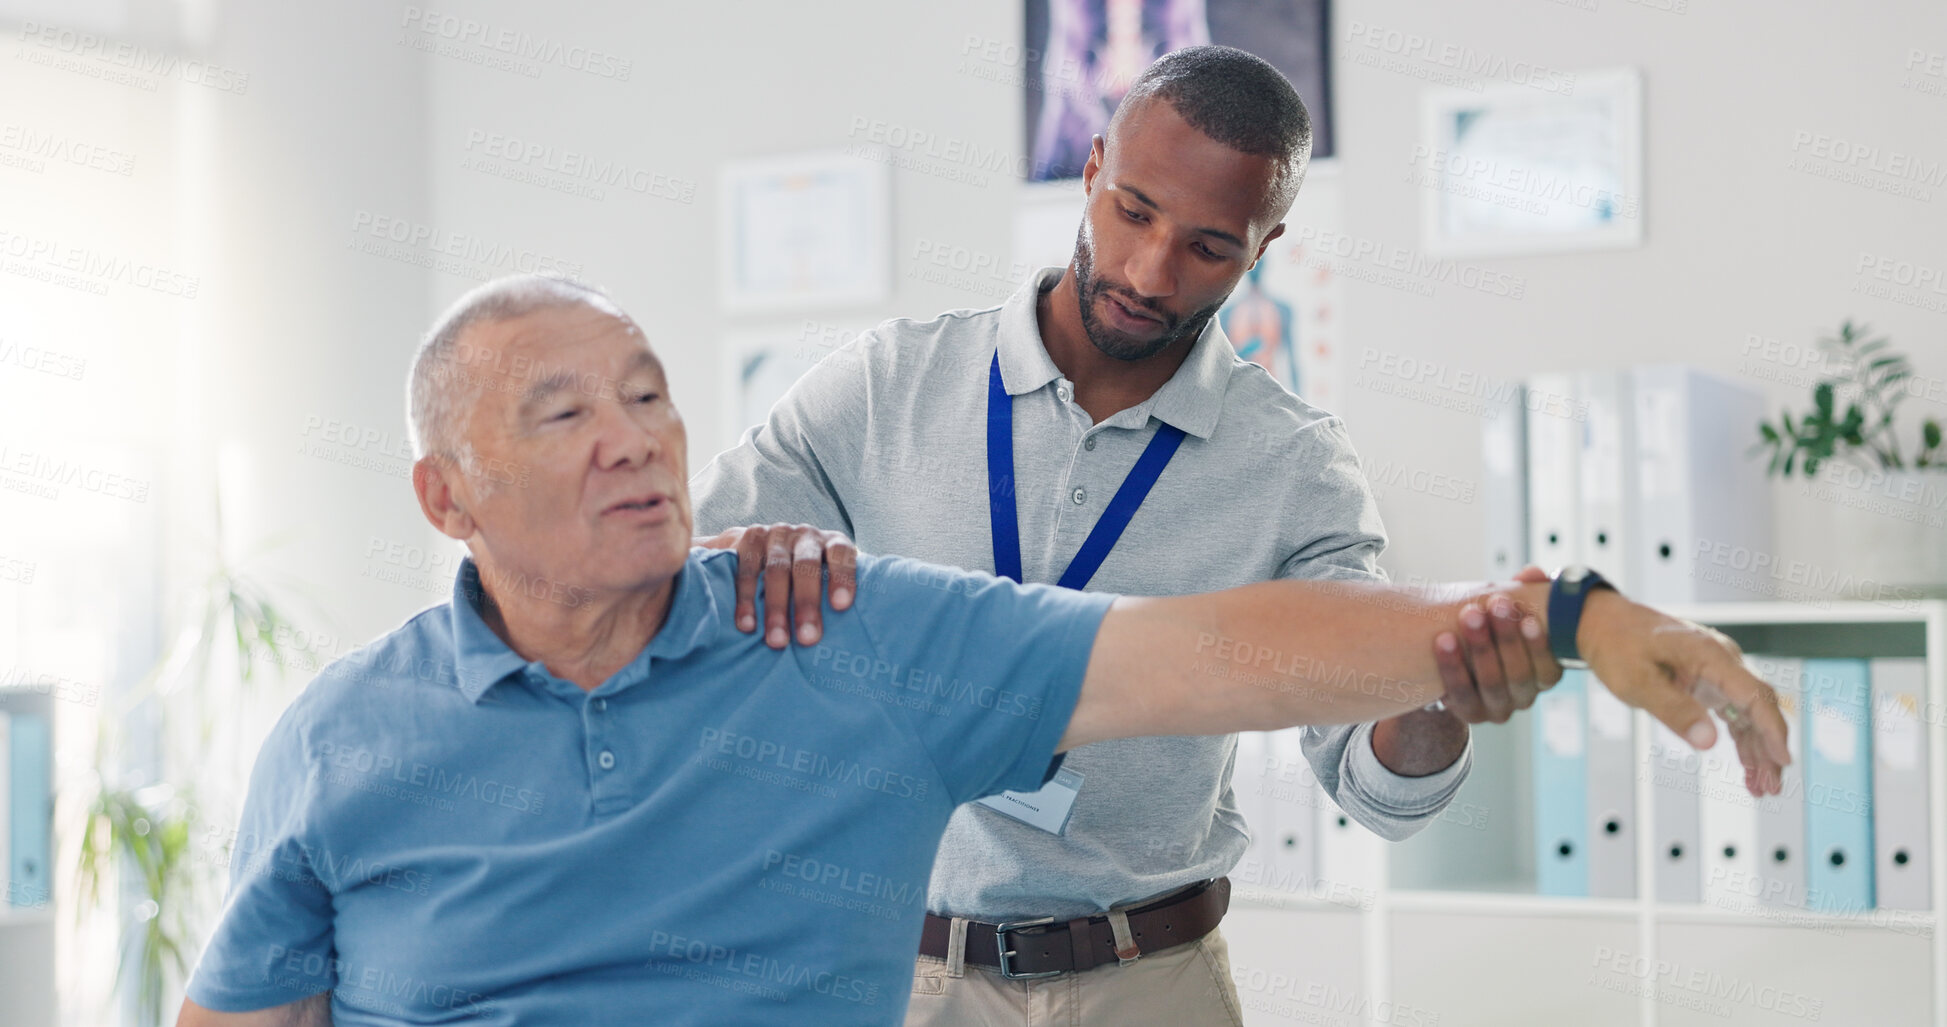 Buy stock photo Old man, physiotherapist and arm stretching for training mobility in retirement or rehabilitation, wellness or injury. Elderly person, muscle support and performance help, recovery or consultation